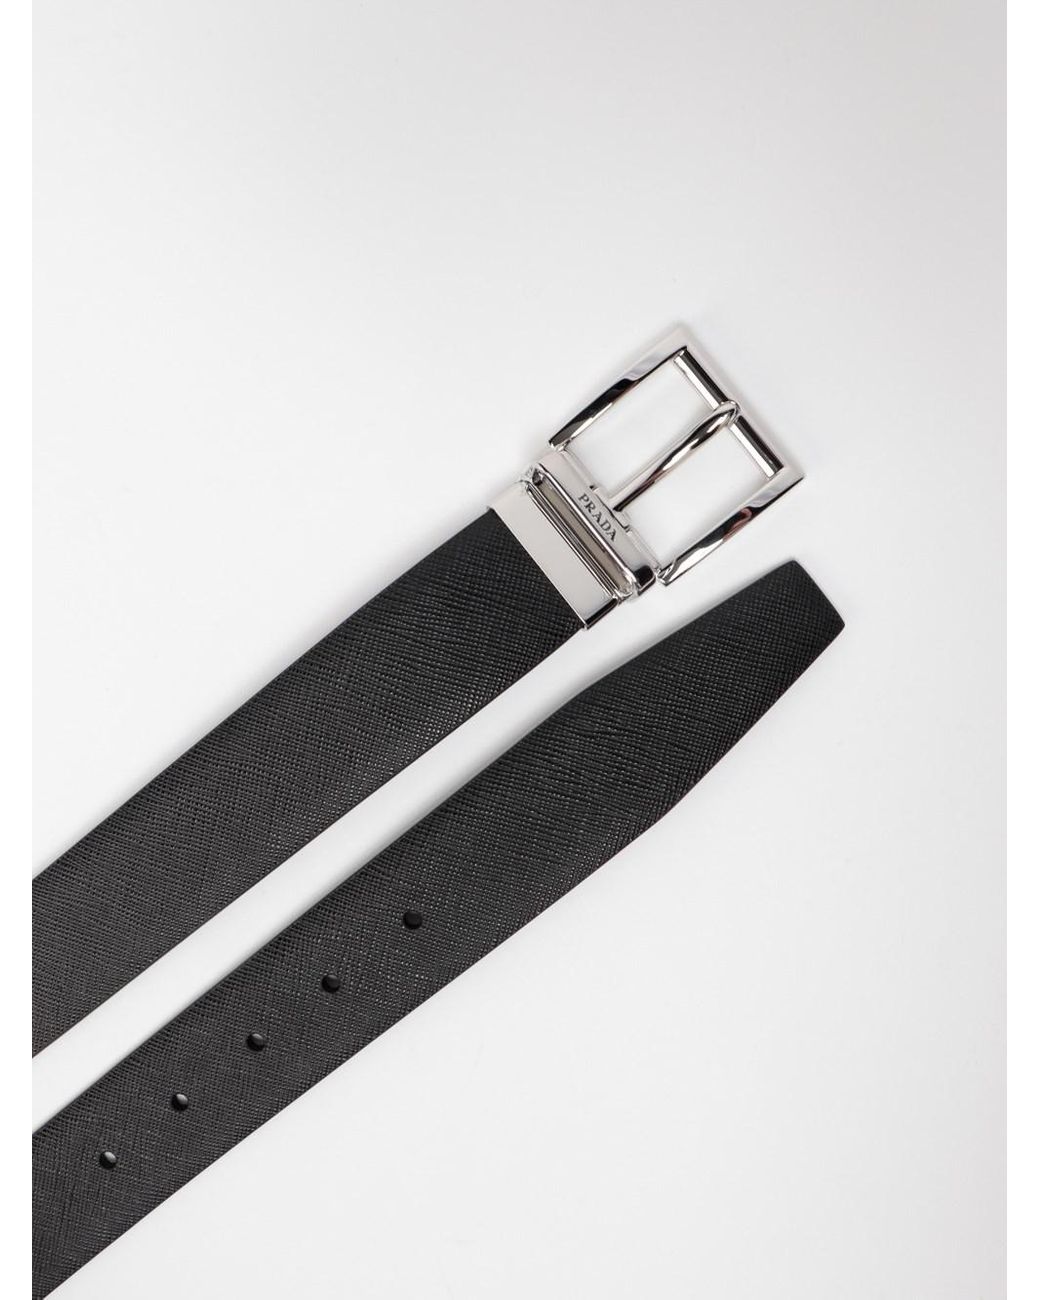 Saks Fifth Avenue Made in Italy Saffiano Leather Belt on SALE